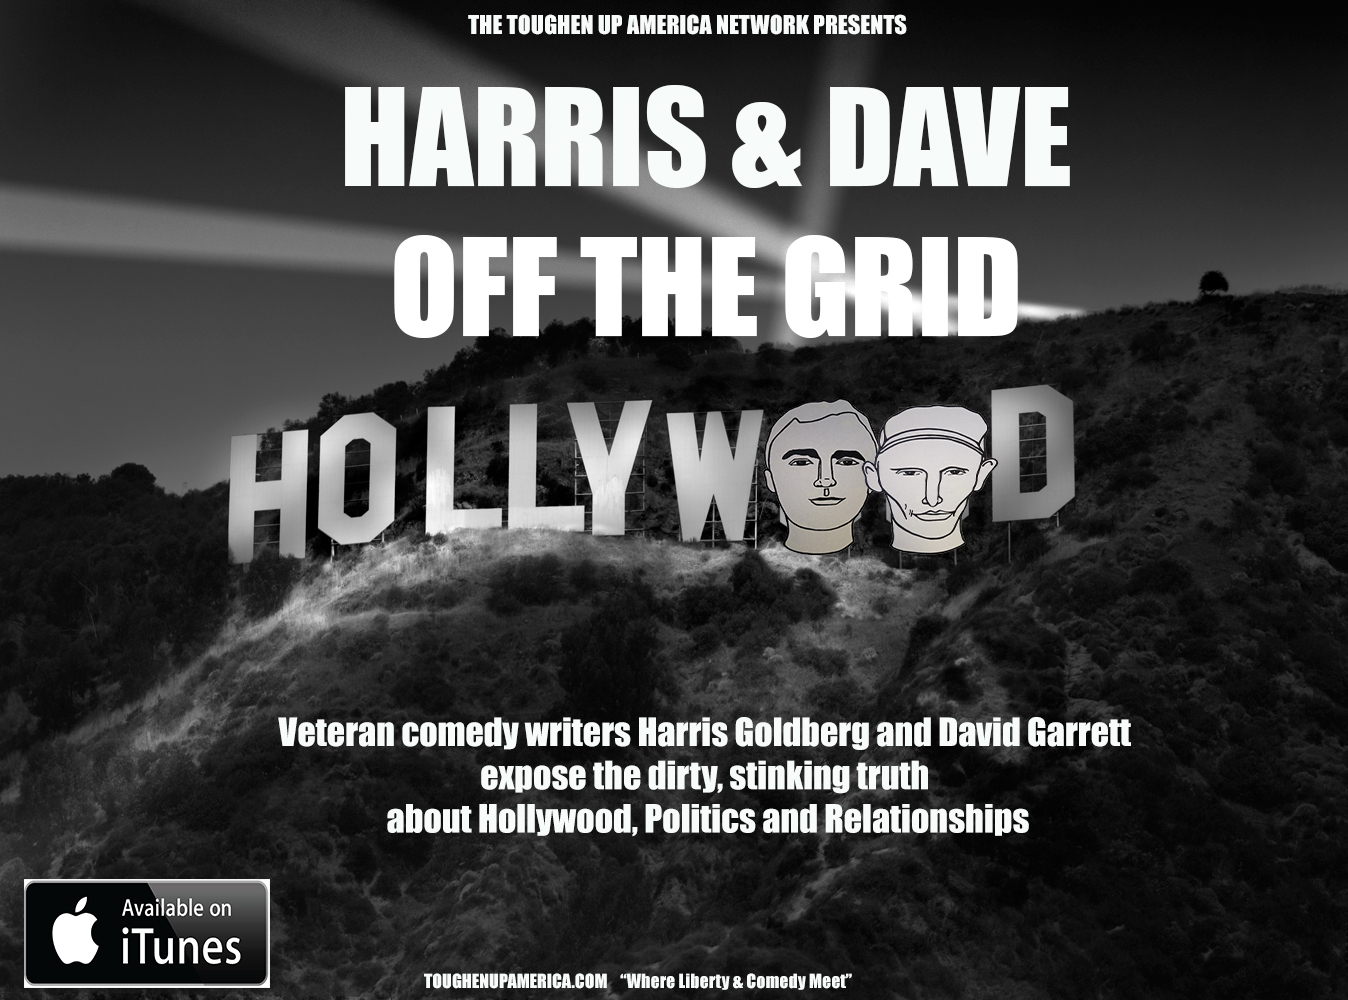 Off the Grid with Harris & Dave